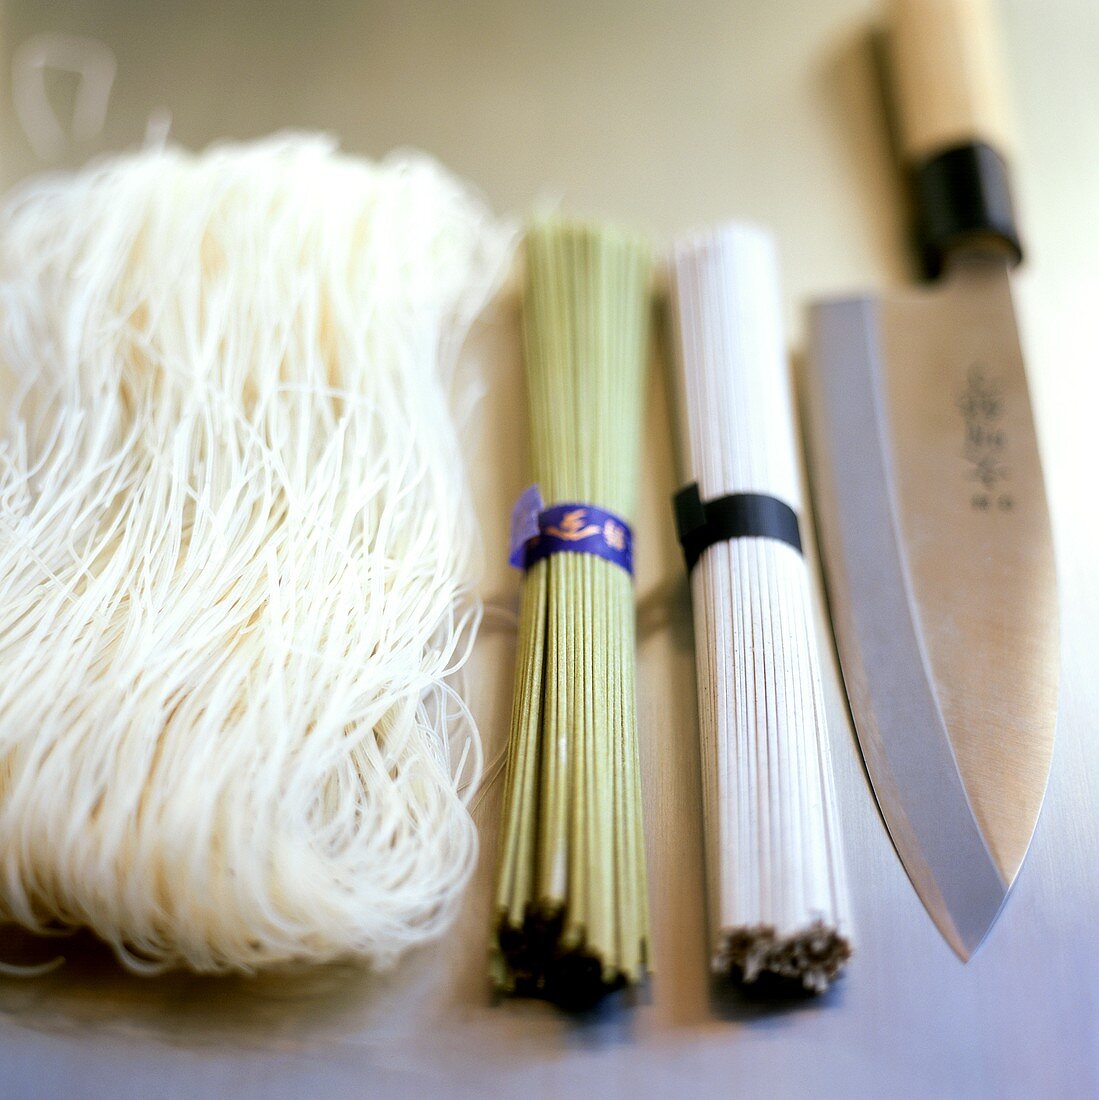 Japanese noodles and knife